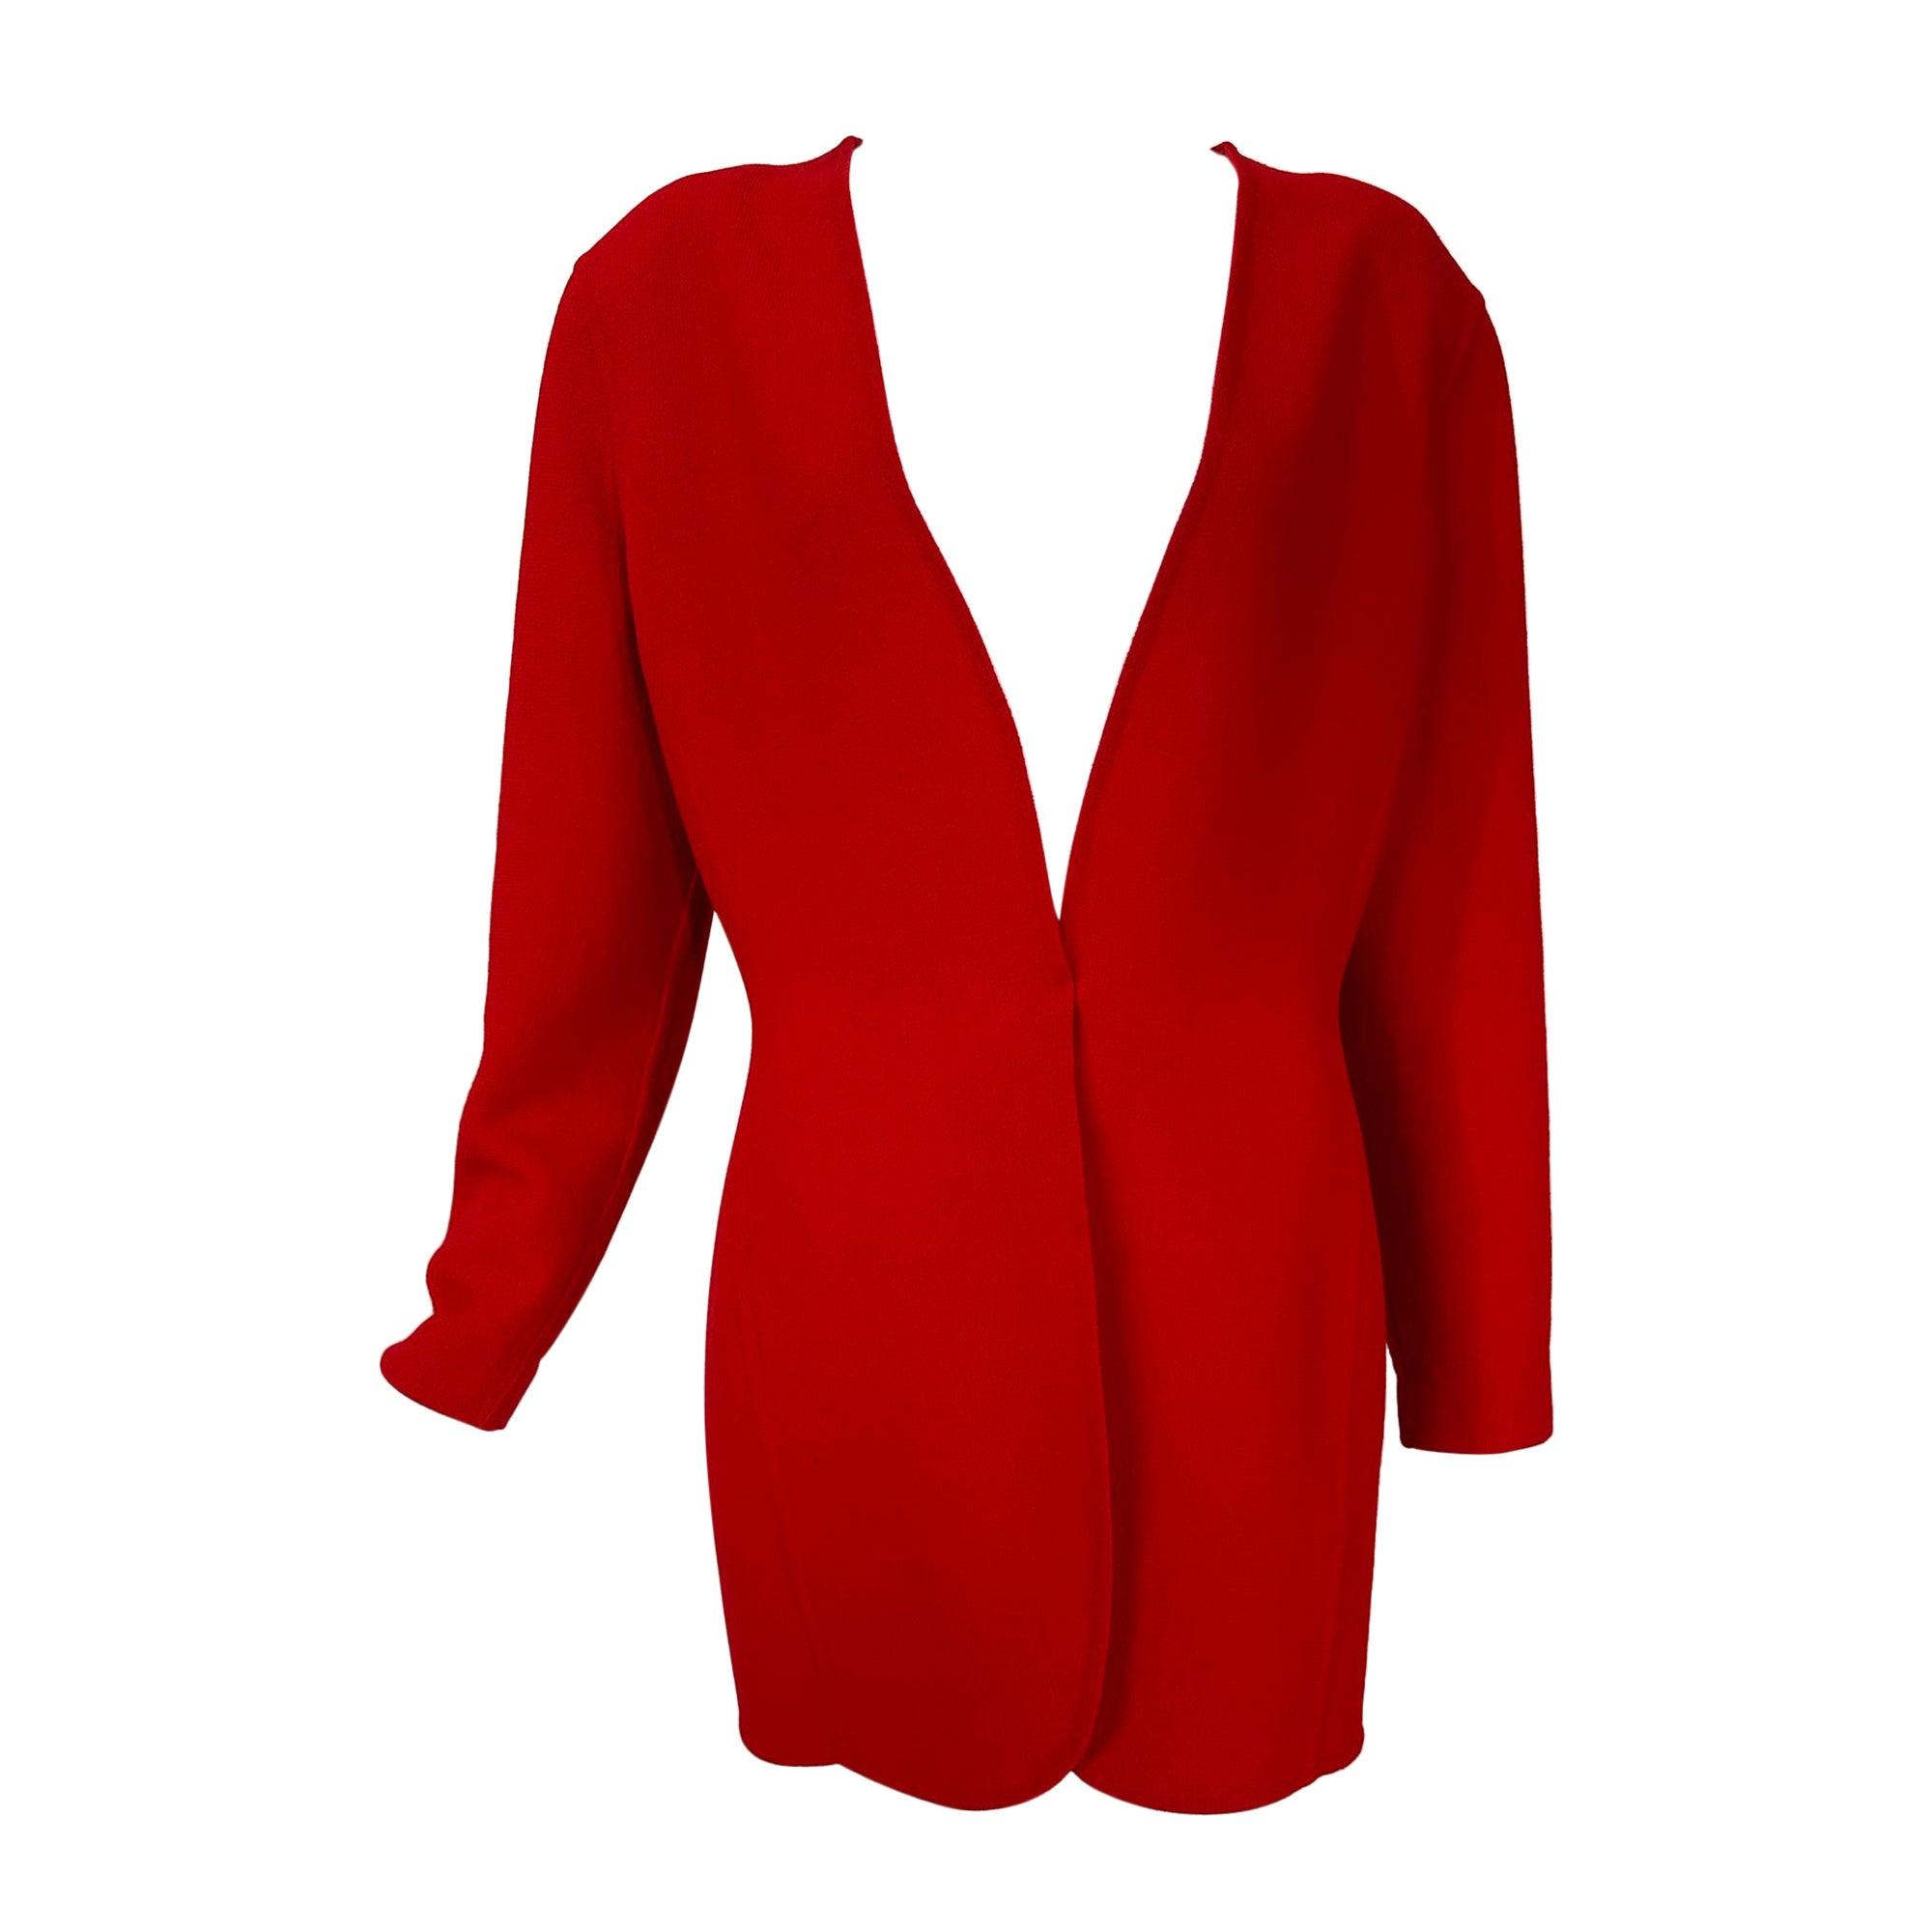 Donna Karan Black Label Fire Engine Red Double Face Wool Jacket For Sale